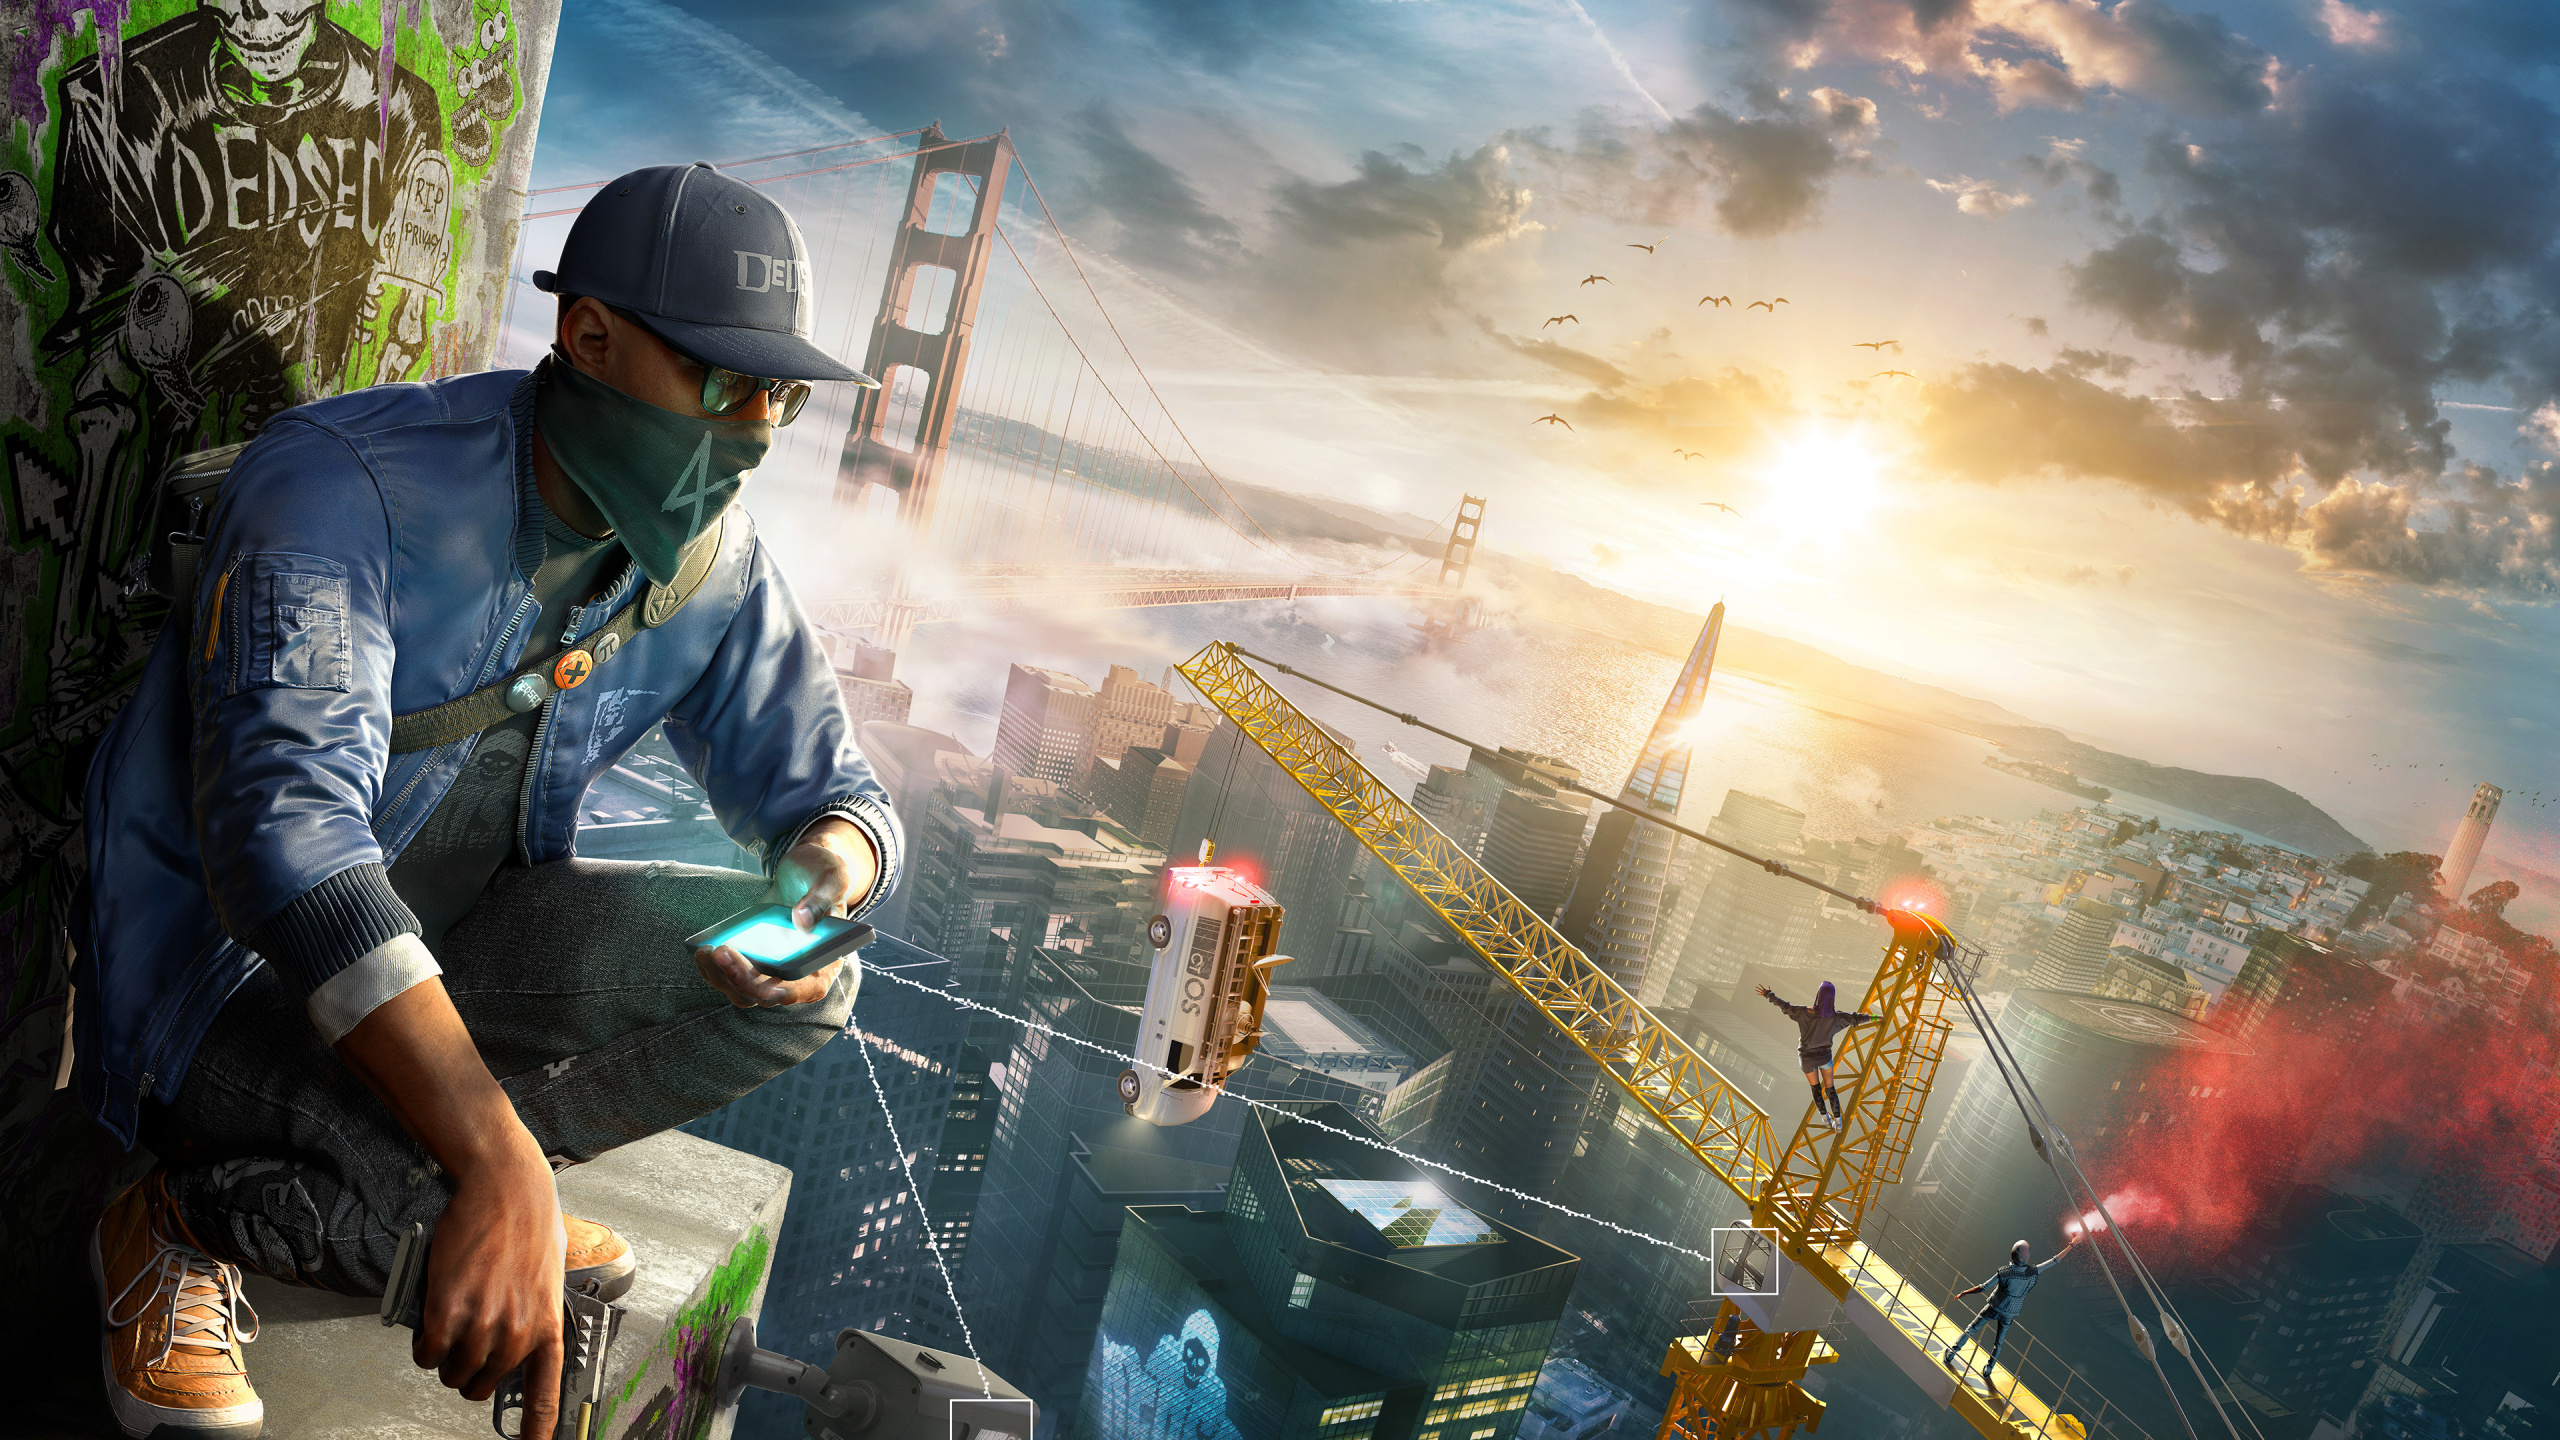 Watch Dogs 2, Watch Dogs, Ubisoft, Playstation 4, Juego de Pc. Wallpaper in 2560x1440 Resolution